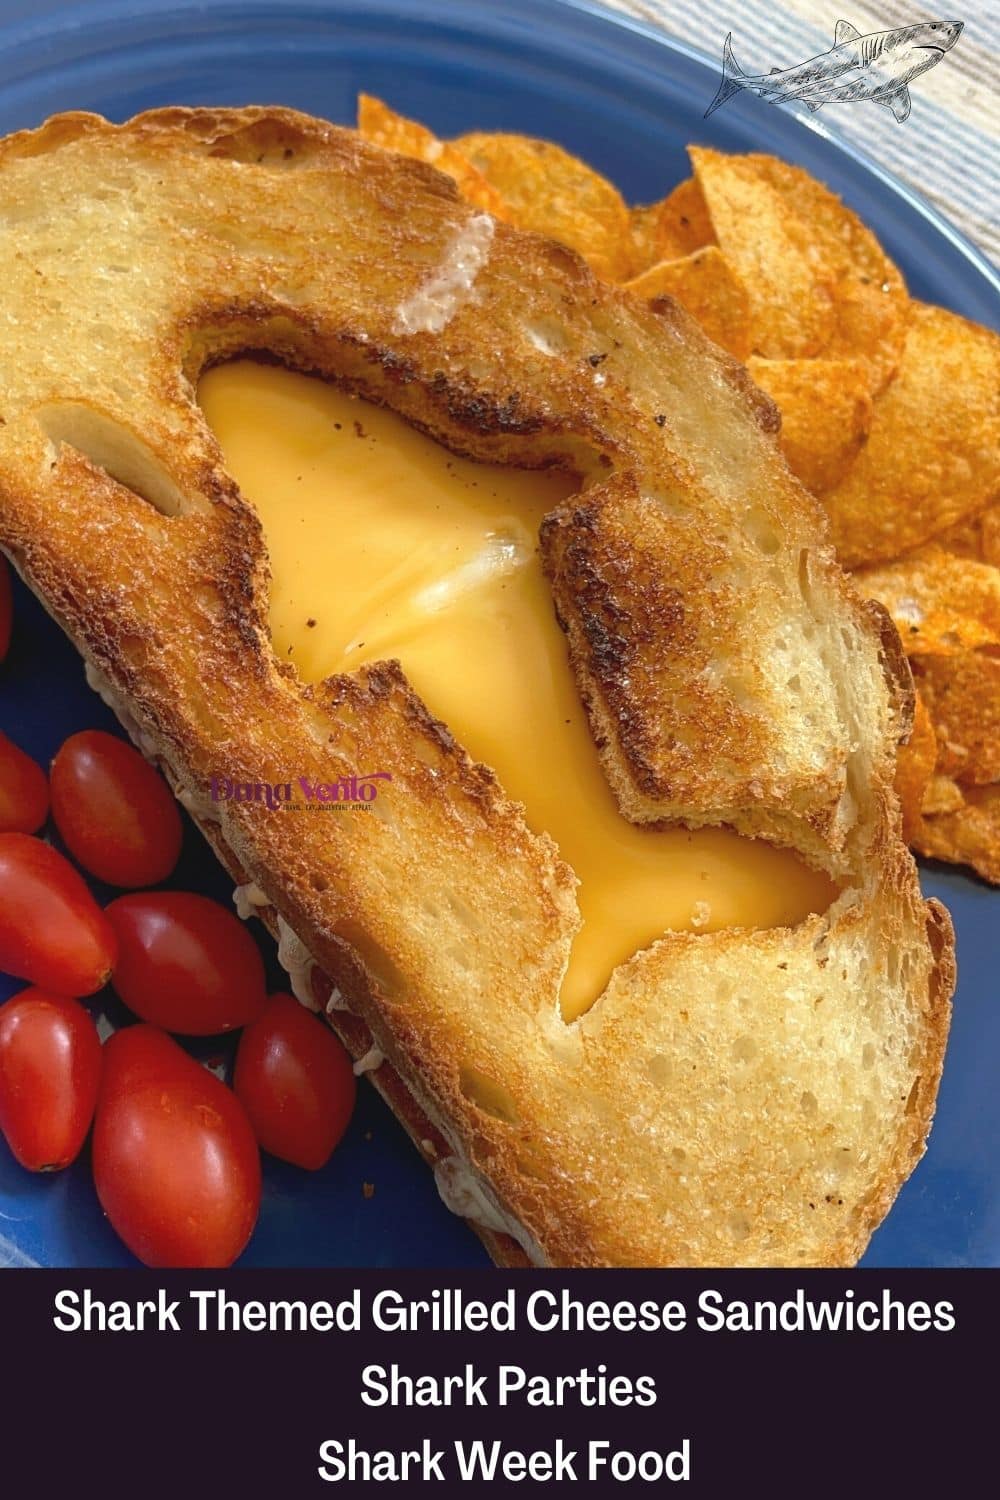 Shark Themed Grilled Cheese Sandwich